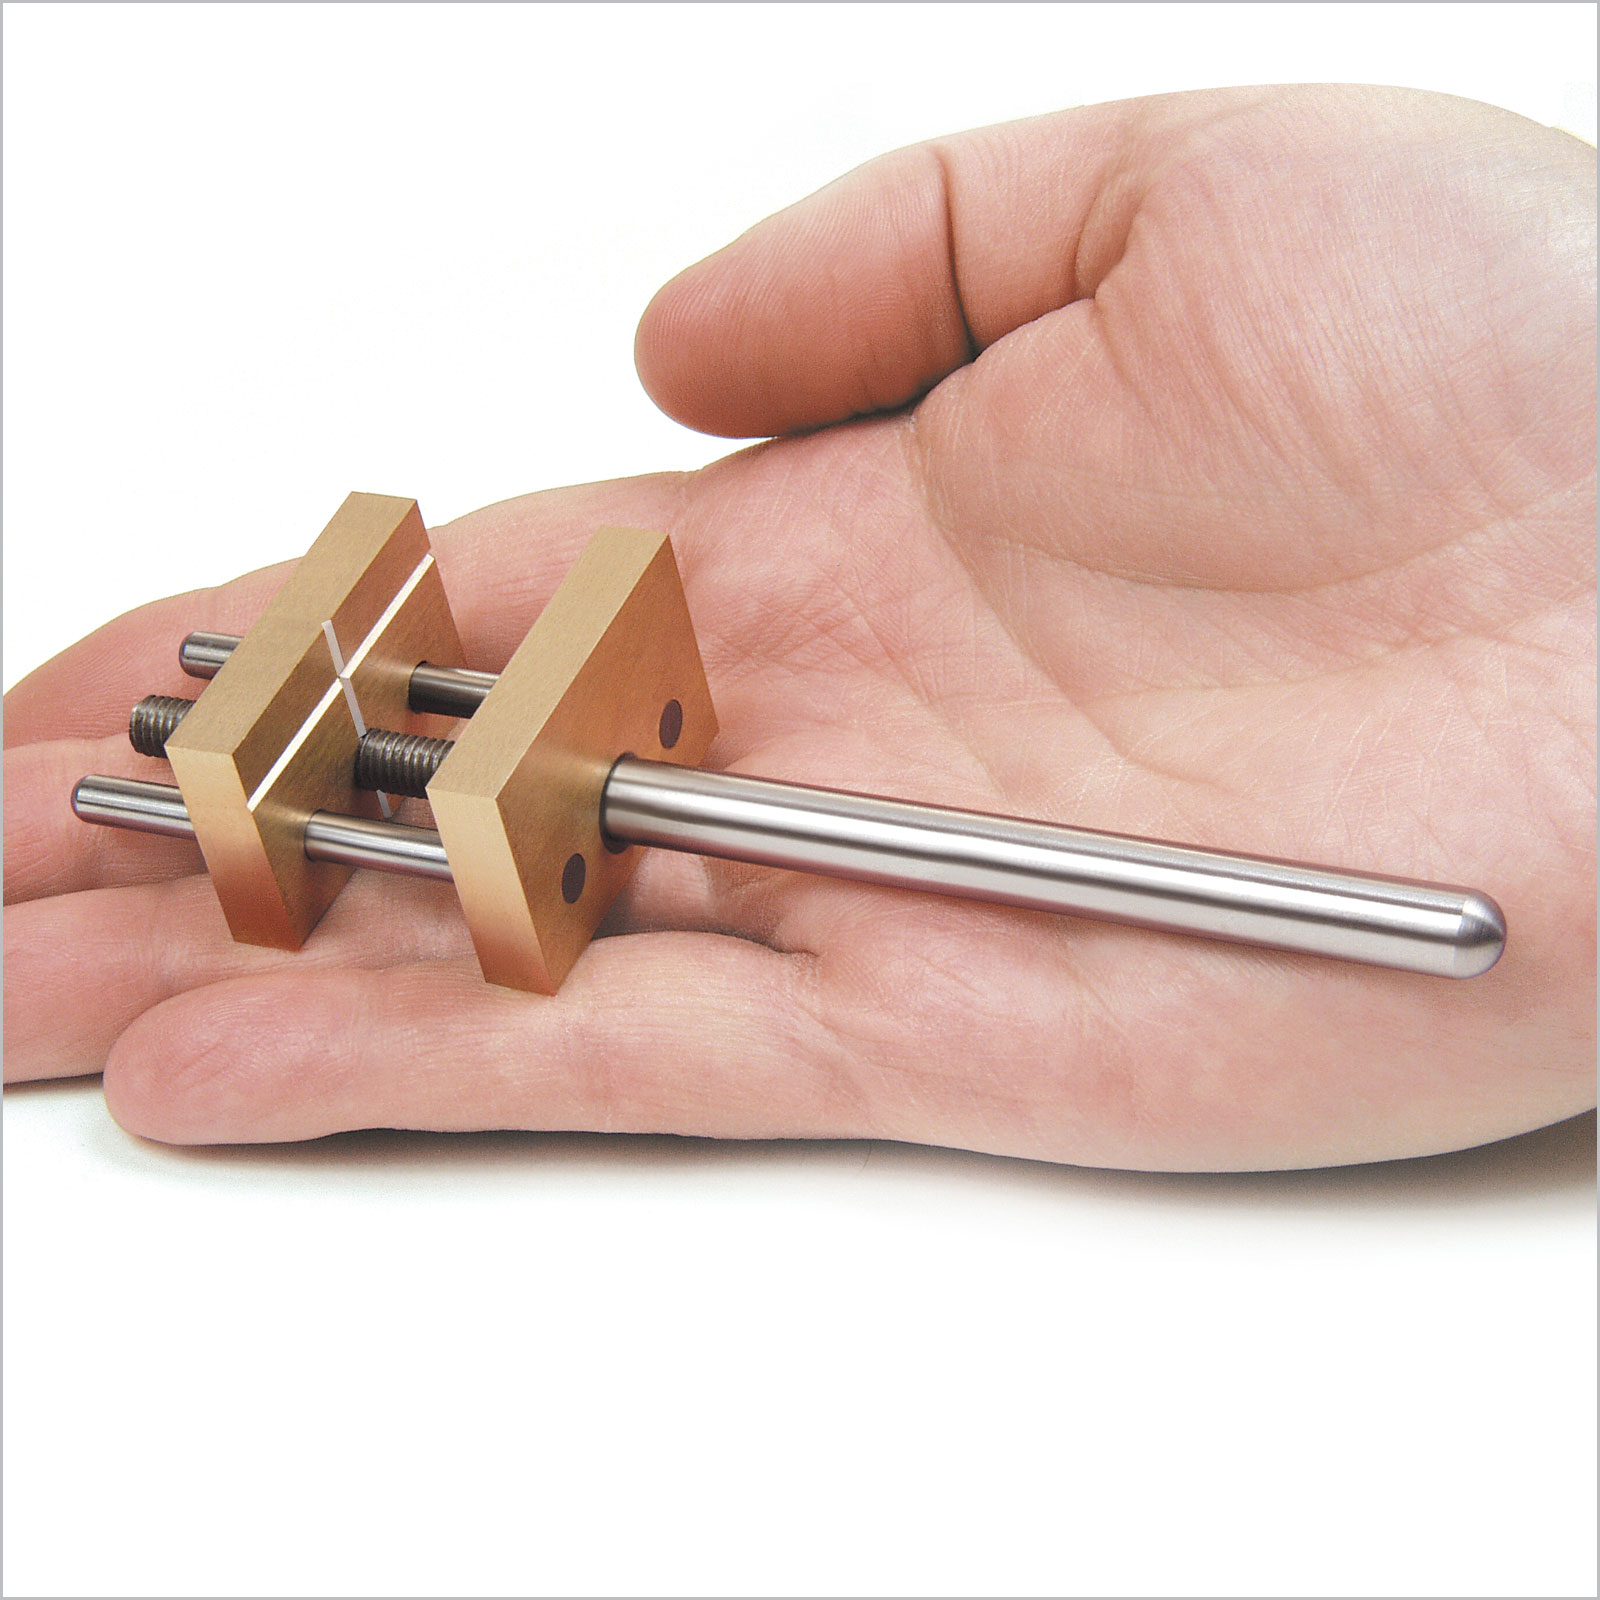 Brass Mini Vise Inch Capacity Jaws Aligned With Metal Guide Pins